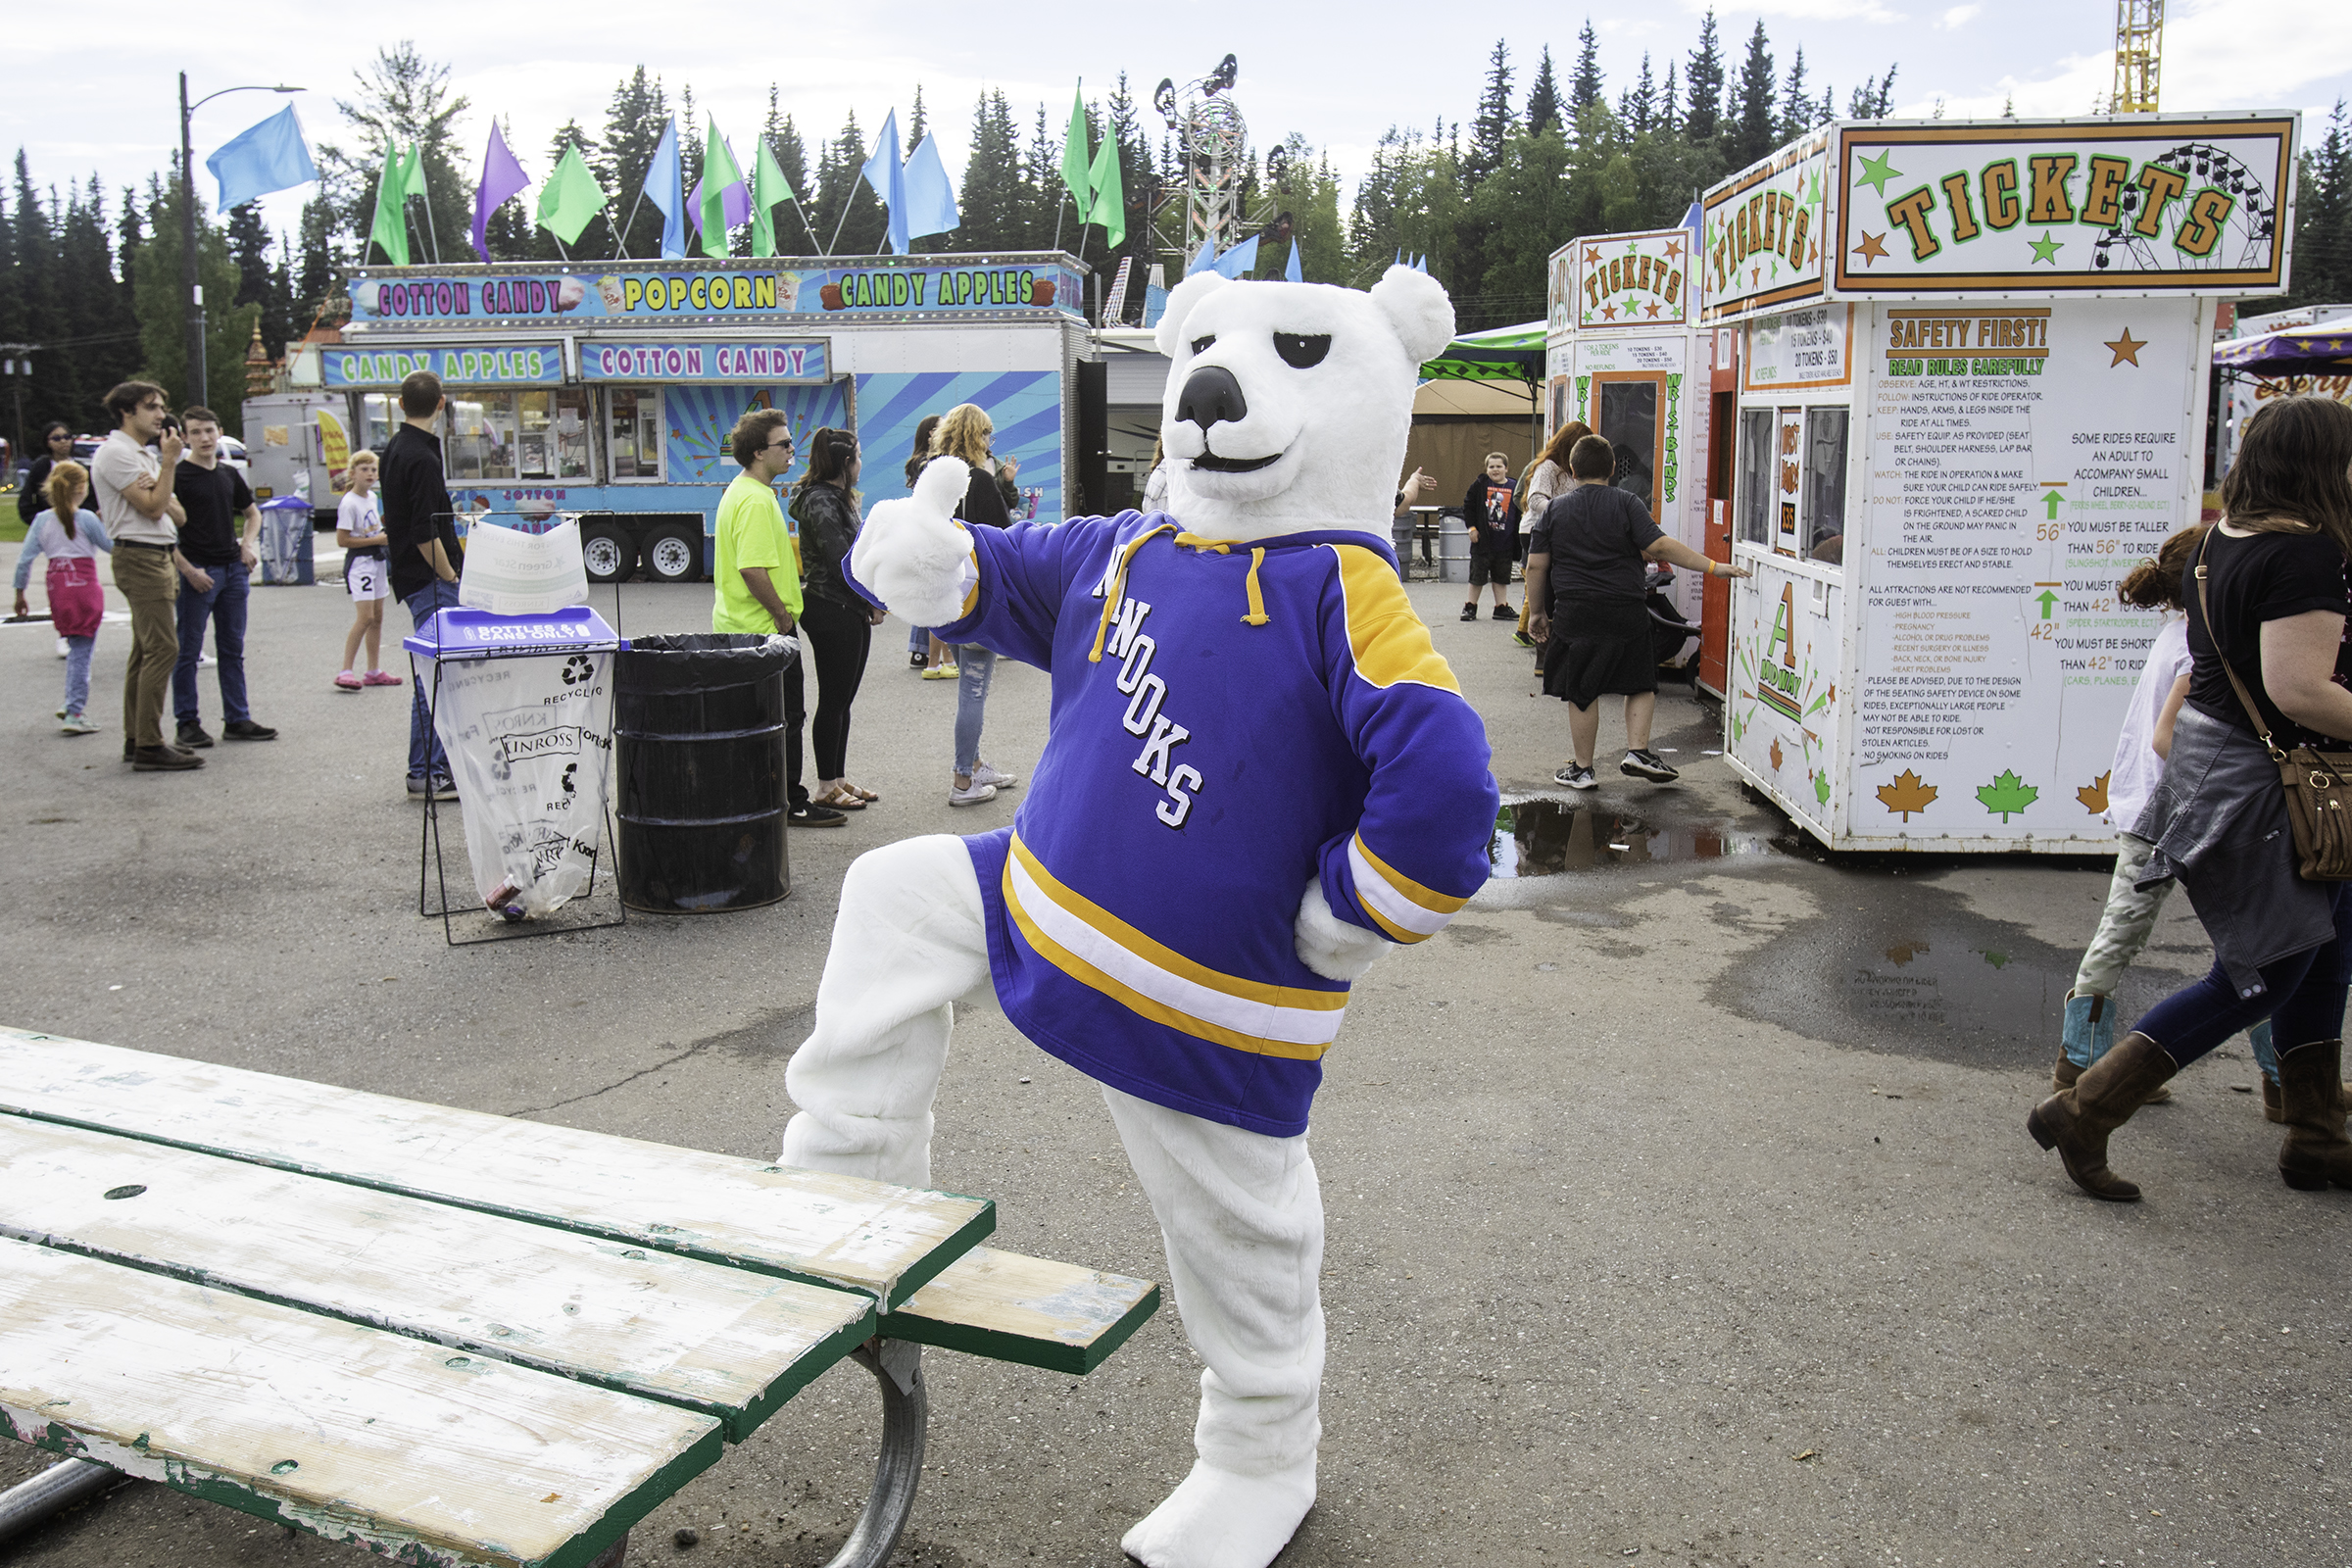 A polar bear mascot wearing a UAF jersey gives a thumbs up while standing on the midway at the fair.